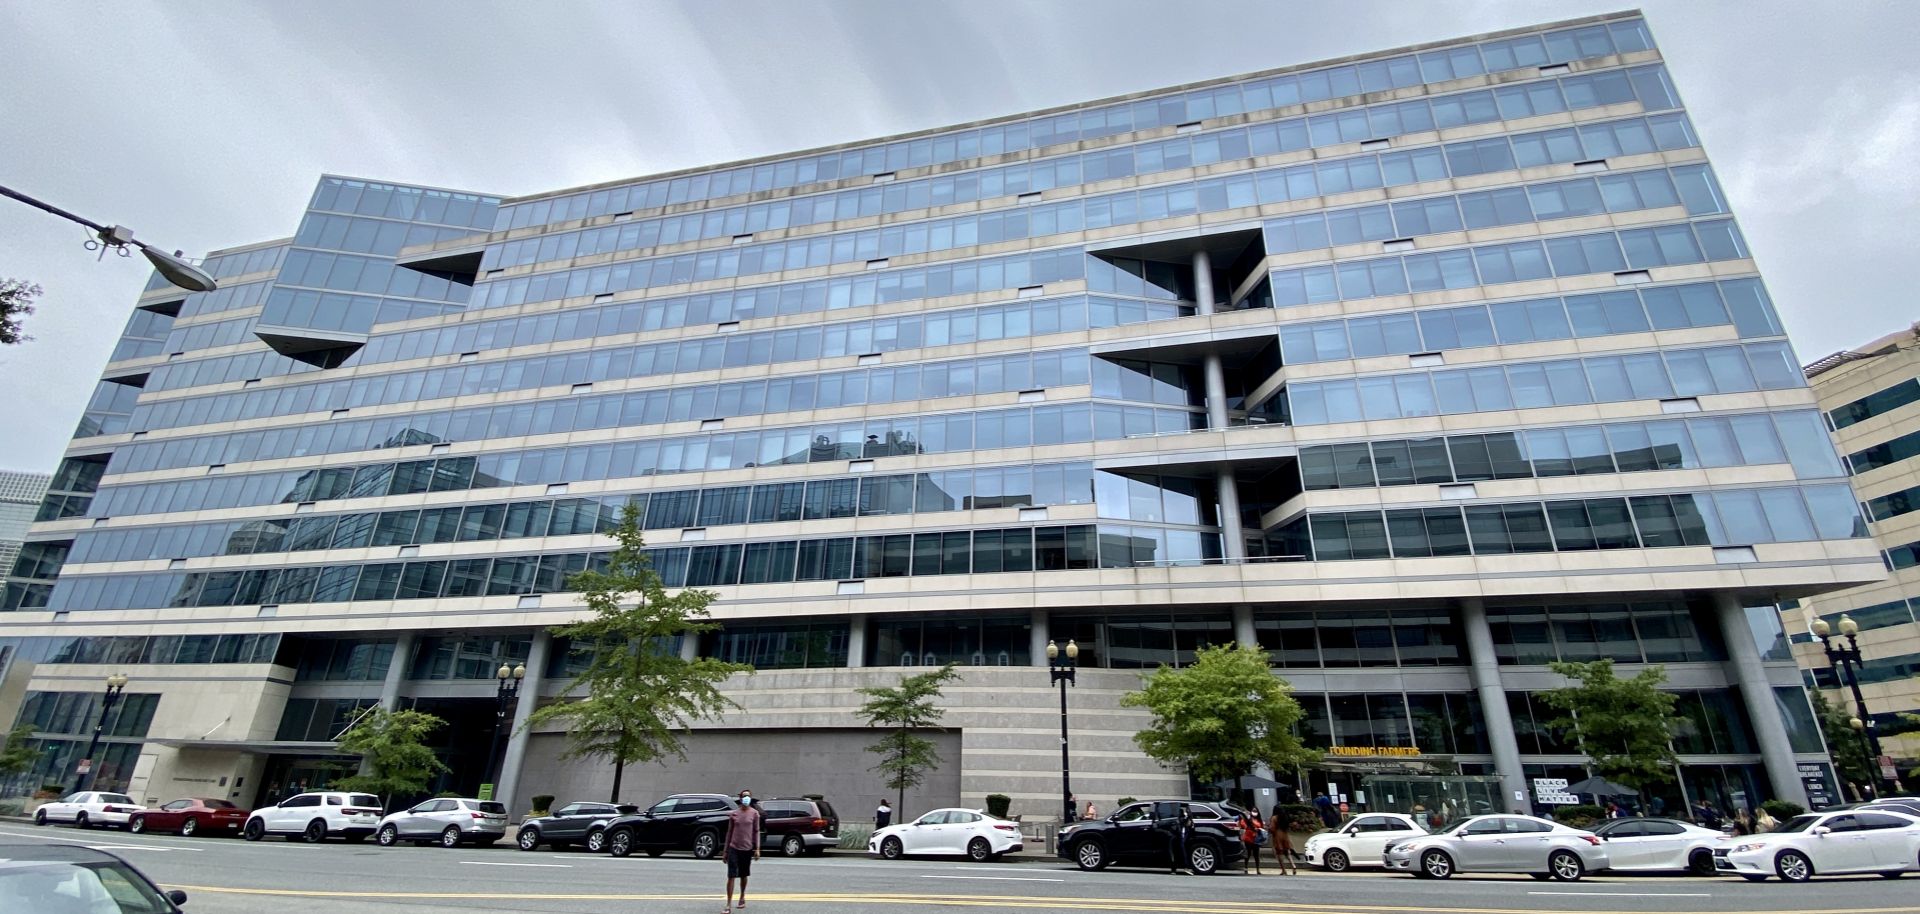 A view of the International Monetary Fund (IMF) building from the street in Washington D.C. on Sept. 25, 2020.